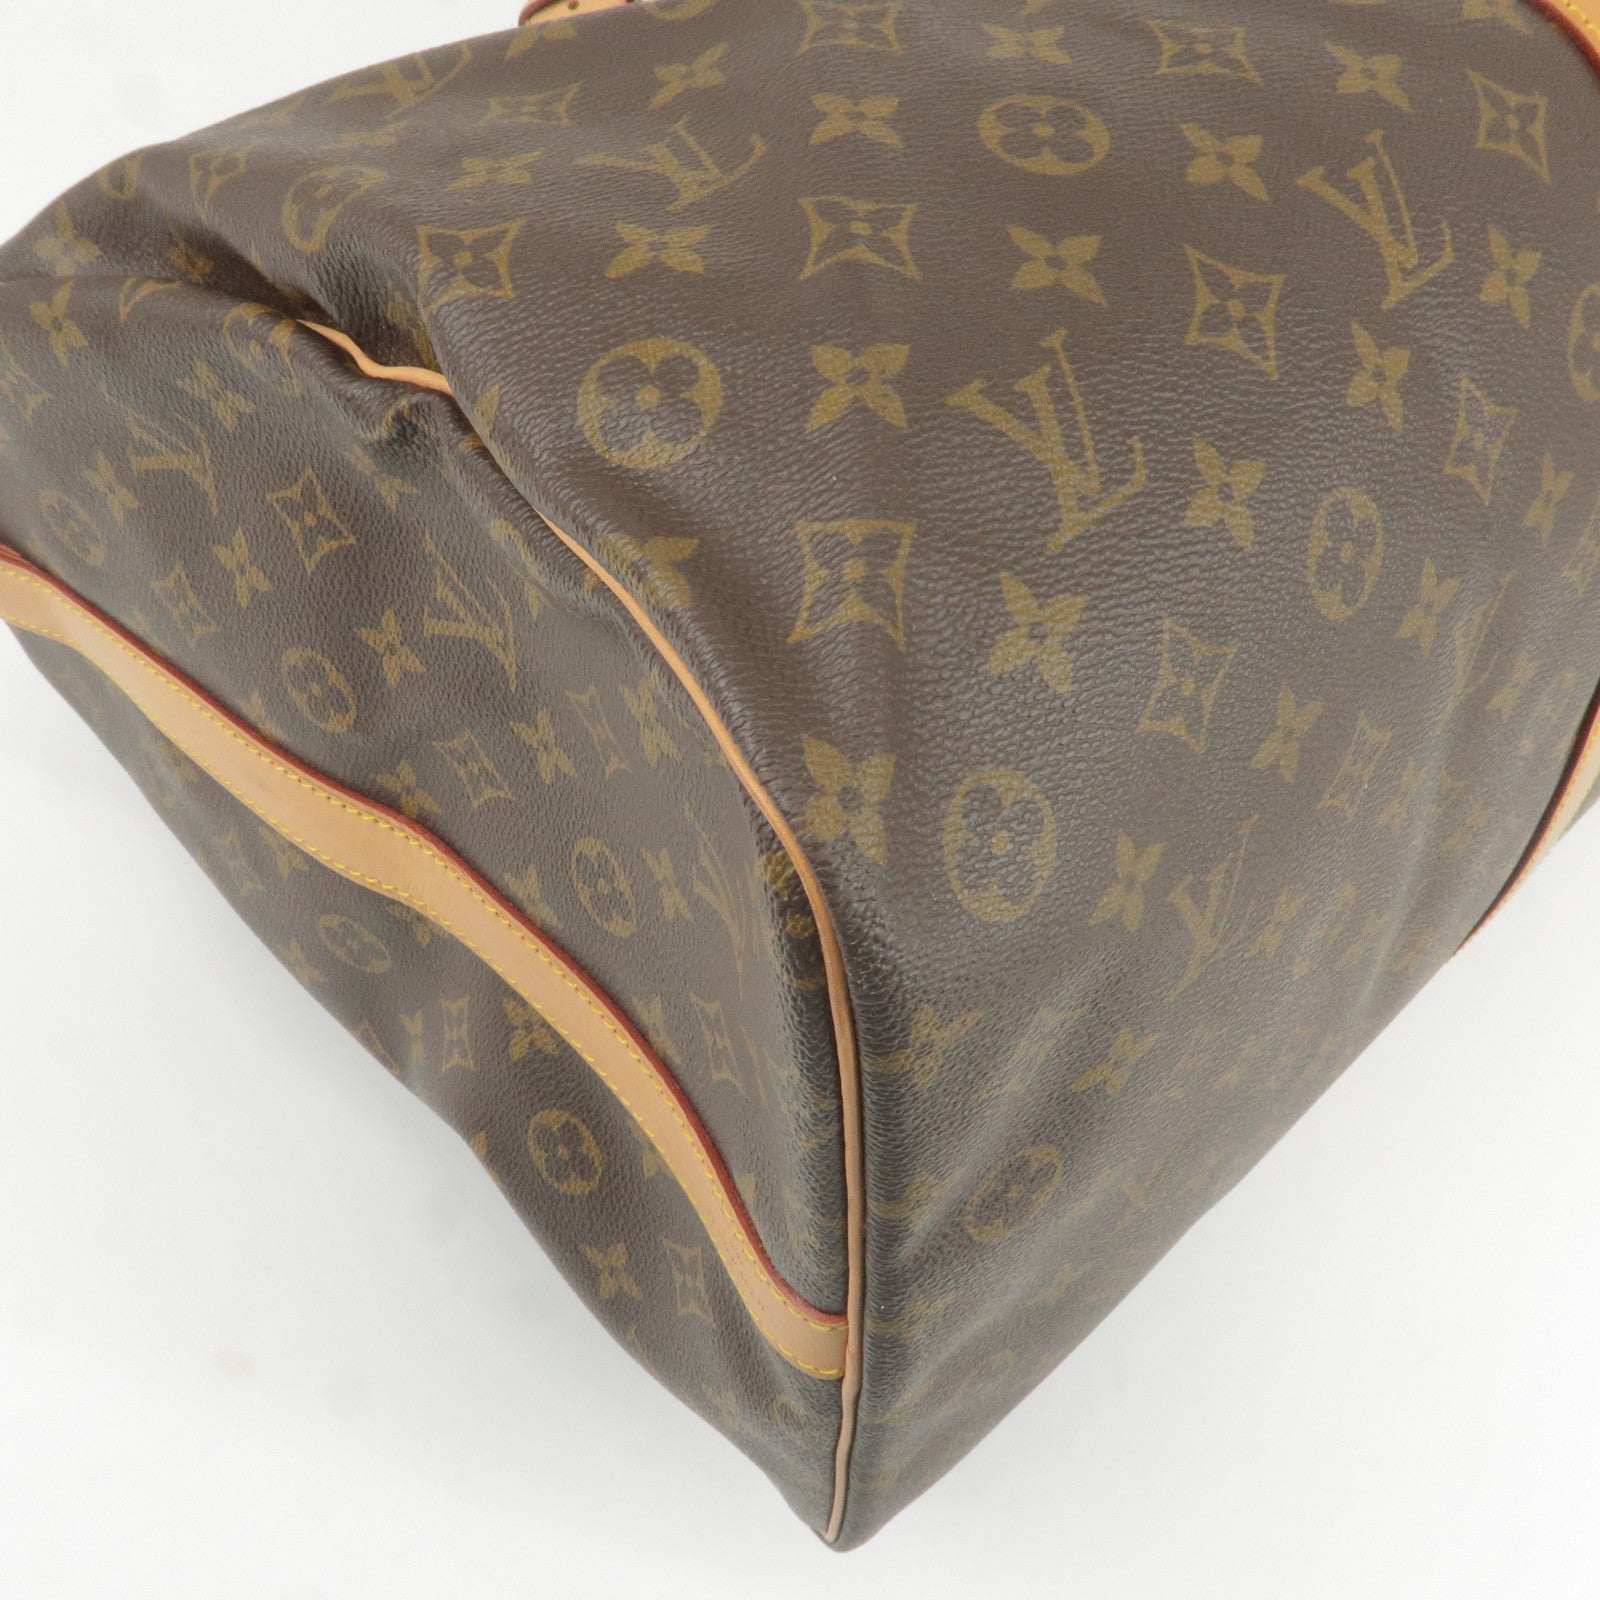 Mazarine bag in brown leather Louis Vuitton - Second Hand / Used